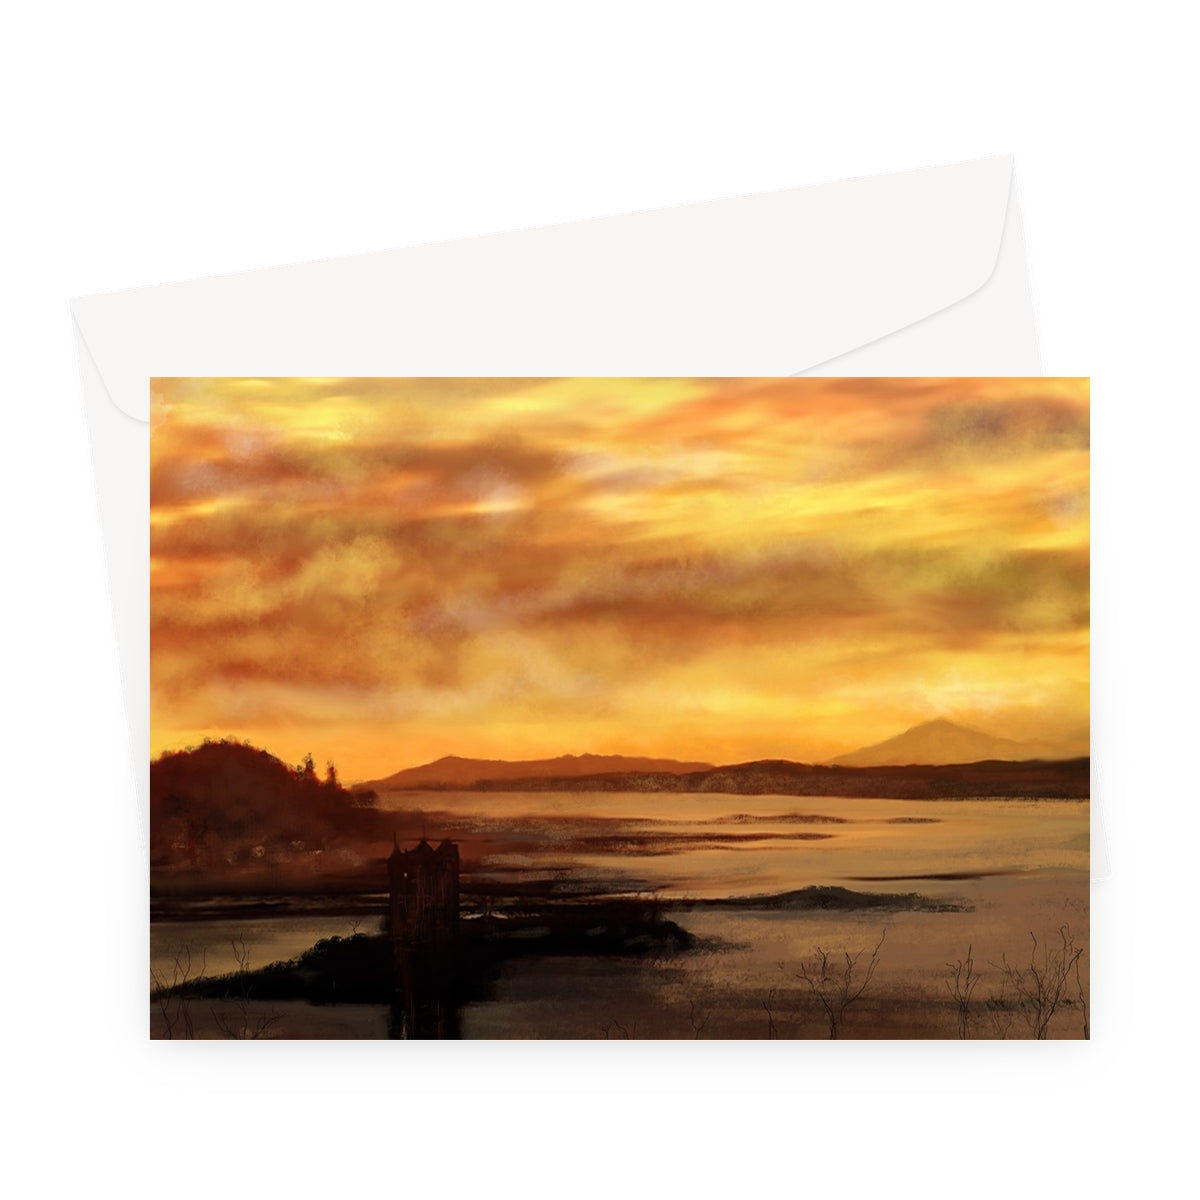 Castle Stalker Dusk Art Gifts Greeting Card-Greetings Cards-Historic & Iconic Scotland Art Gallery-A5 Landscape-10 Cards-Paintings, Prints, Homeware, Art Gifts From Scotland By Scottish Artist Kevin Hunter